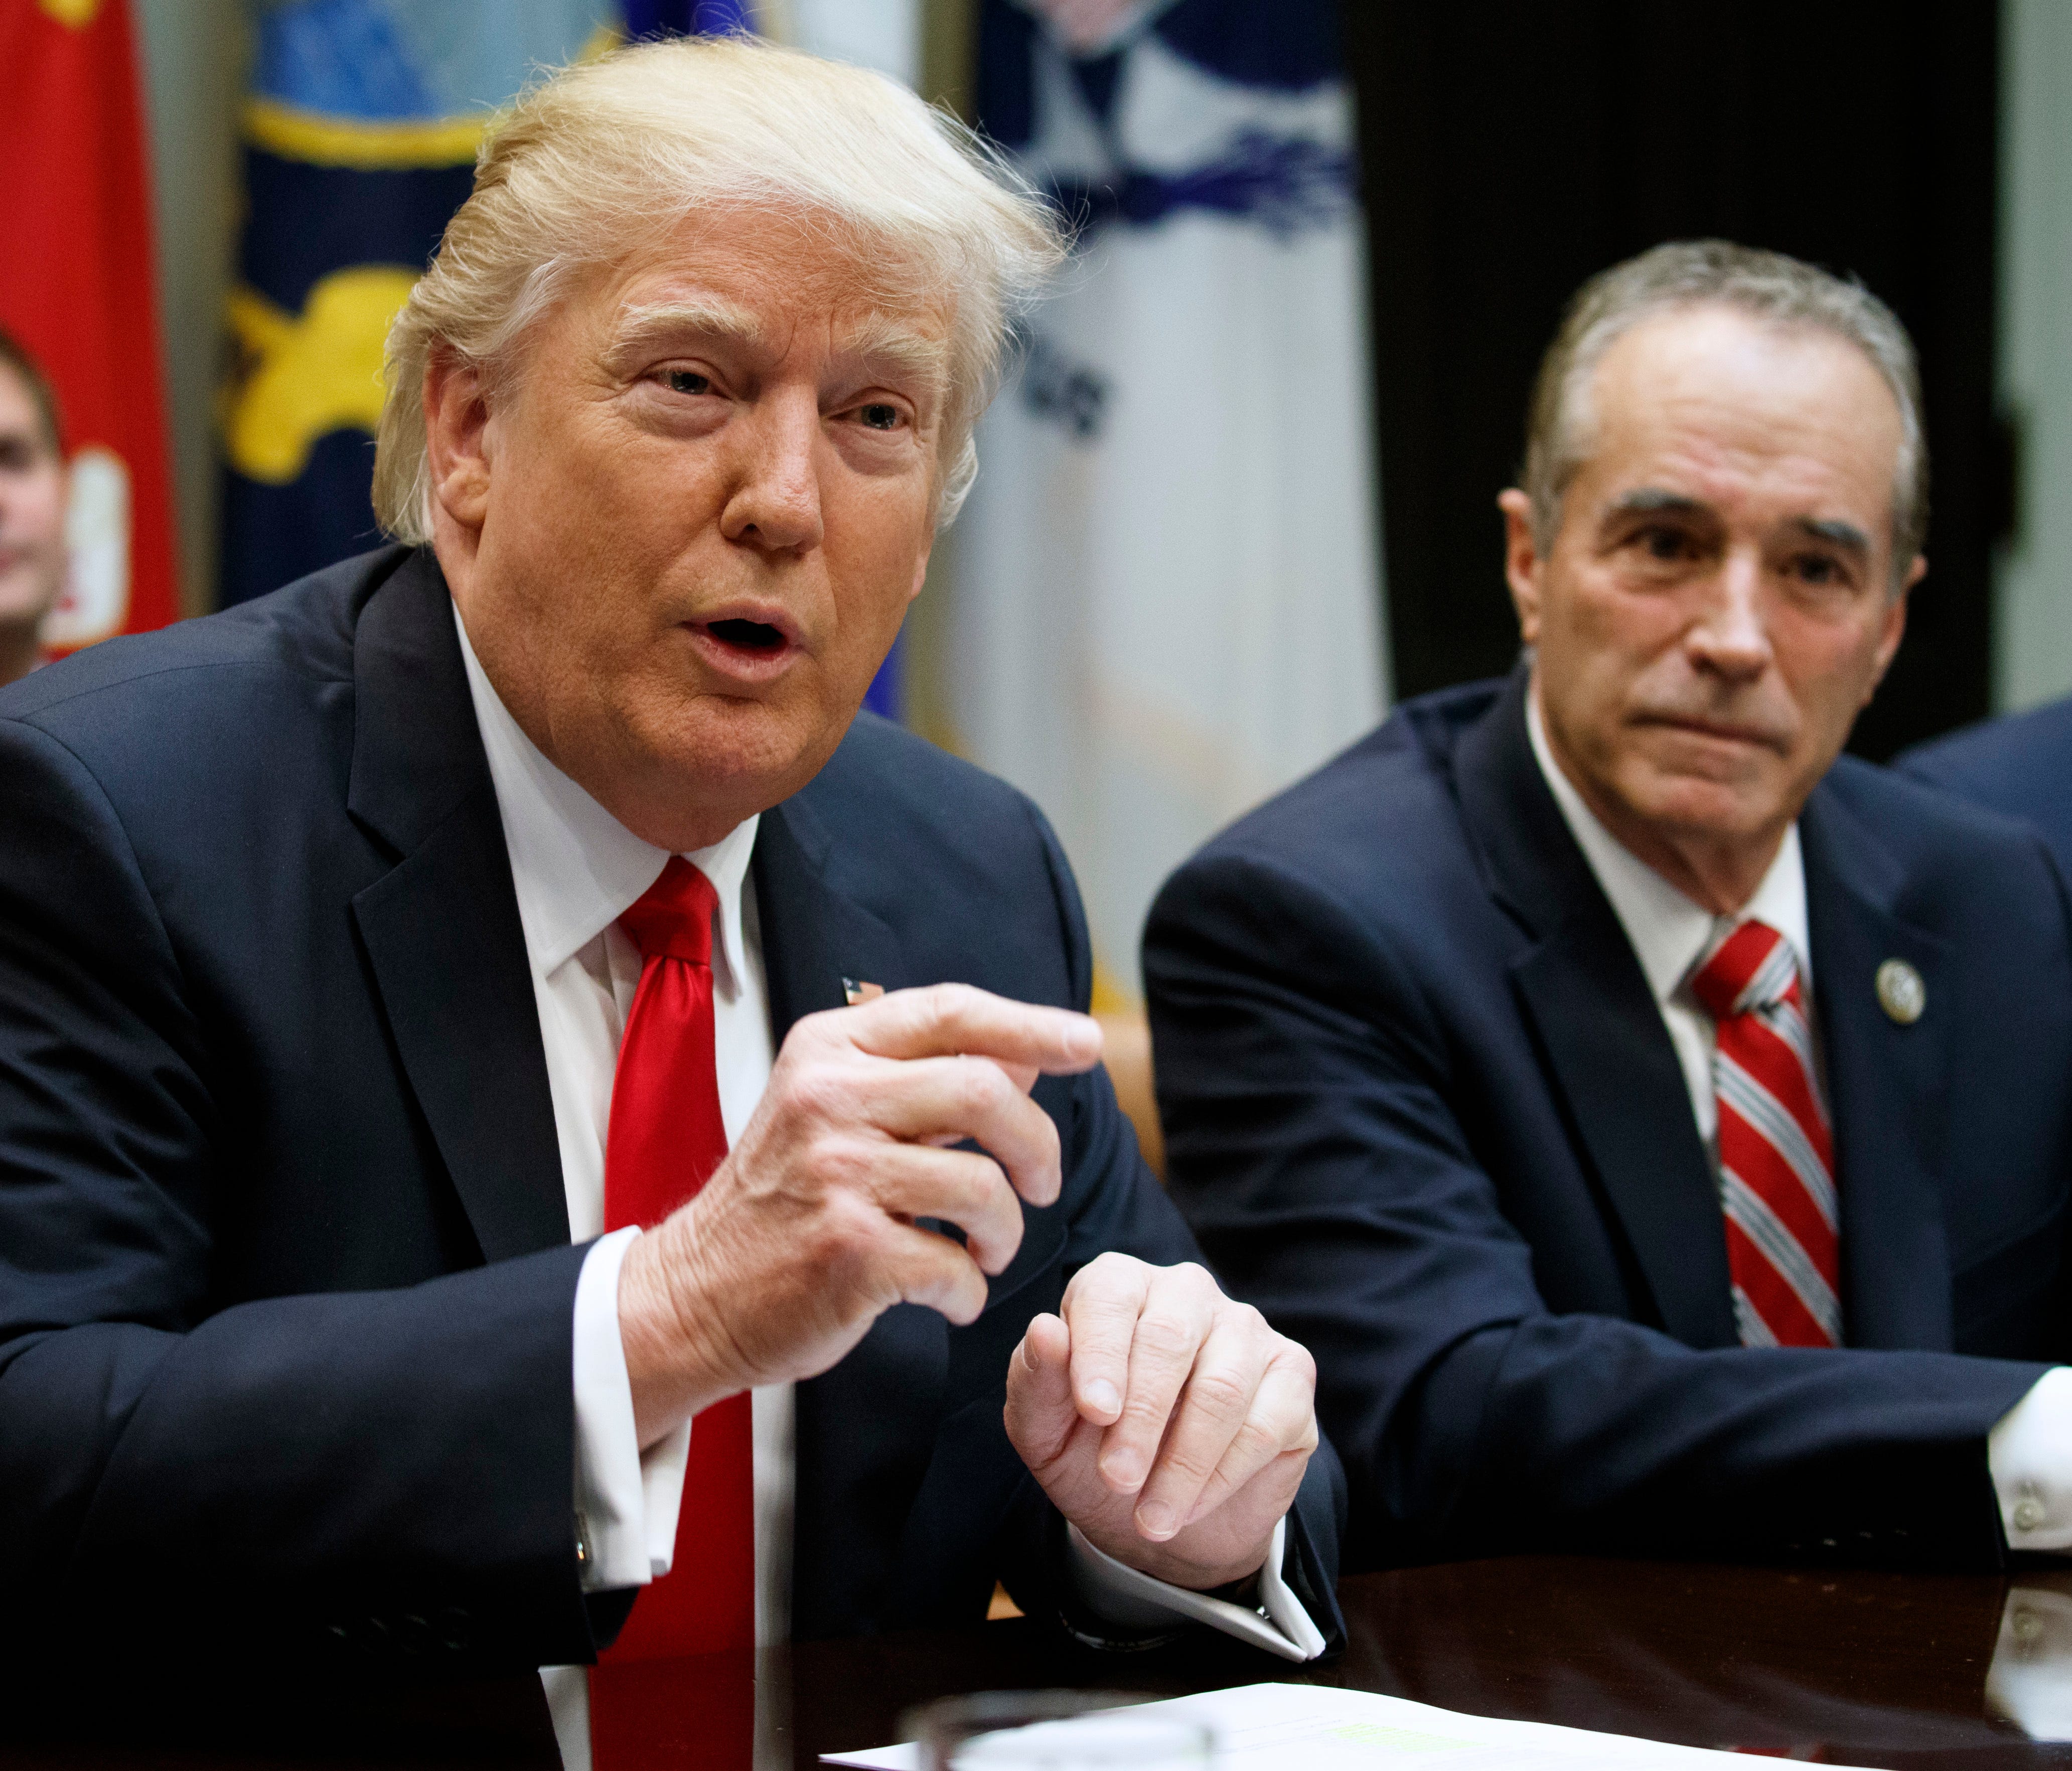 Rep. Chris Collins, R-N.Y., listens at right as President Trump speaks during a meeting with members of Congress in the Roosevelt Room of the White House on Feb. 16, 2017.